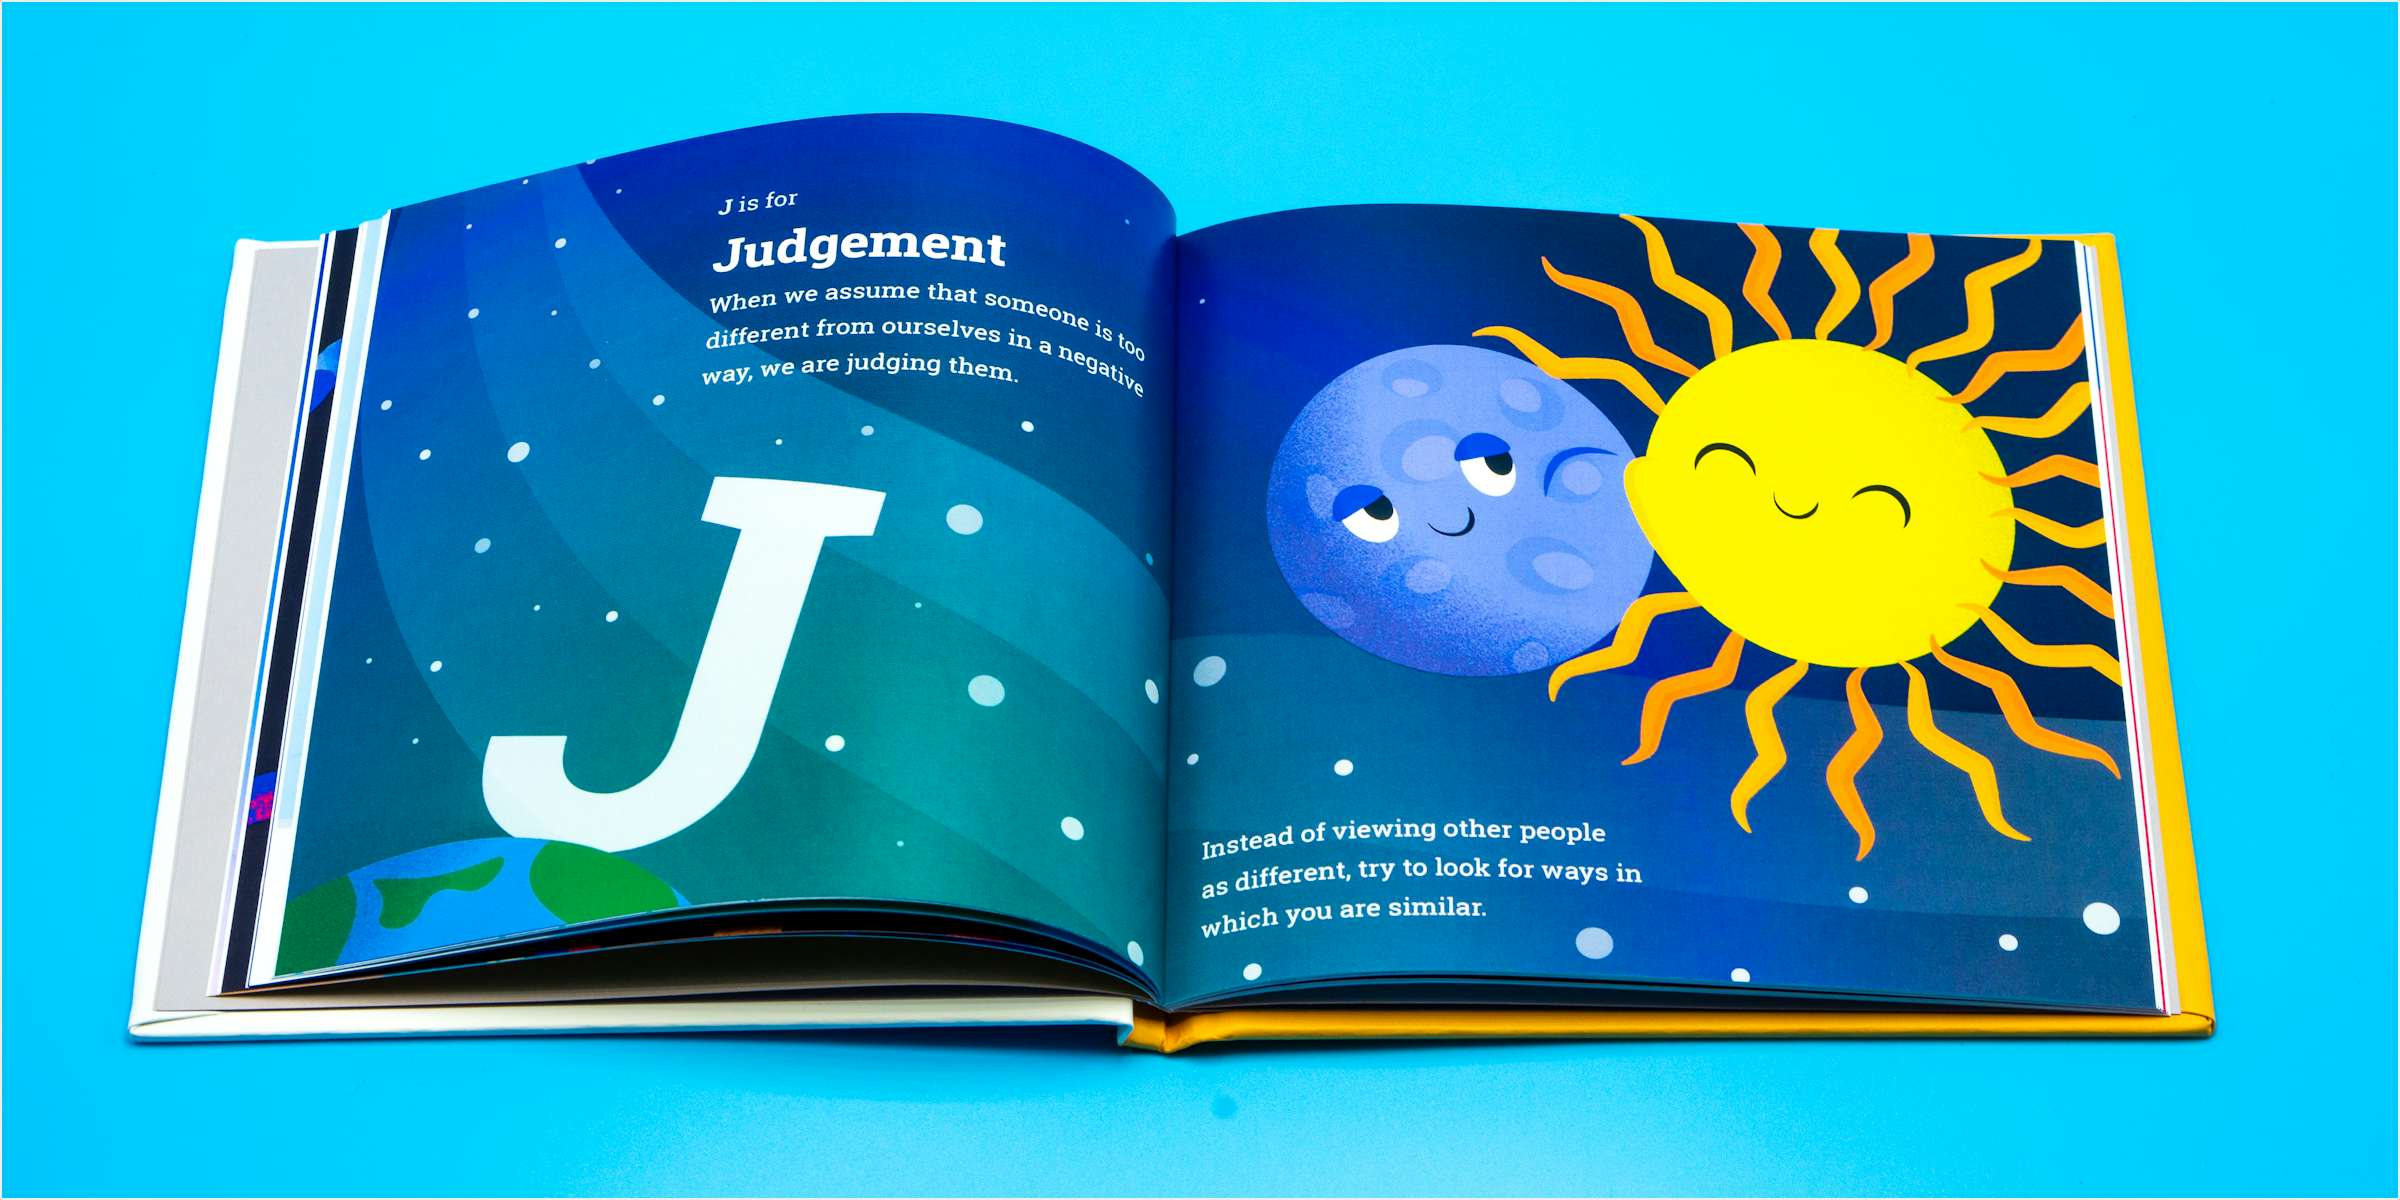 J is for Judgement